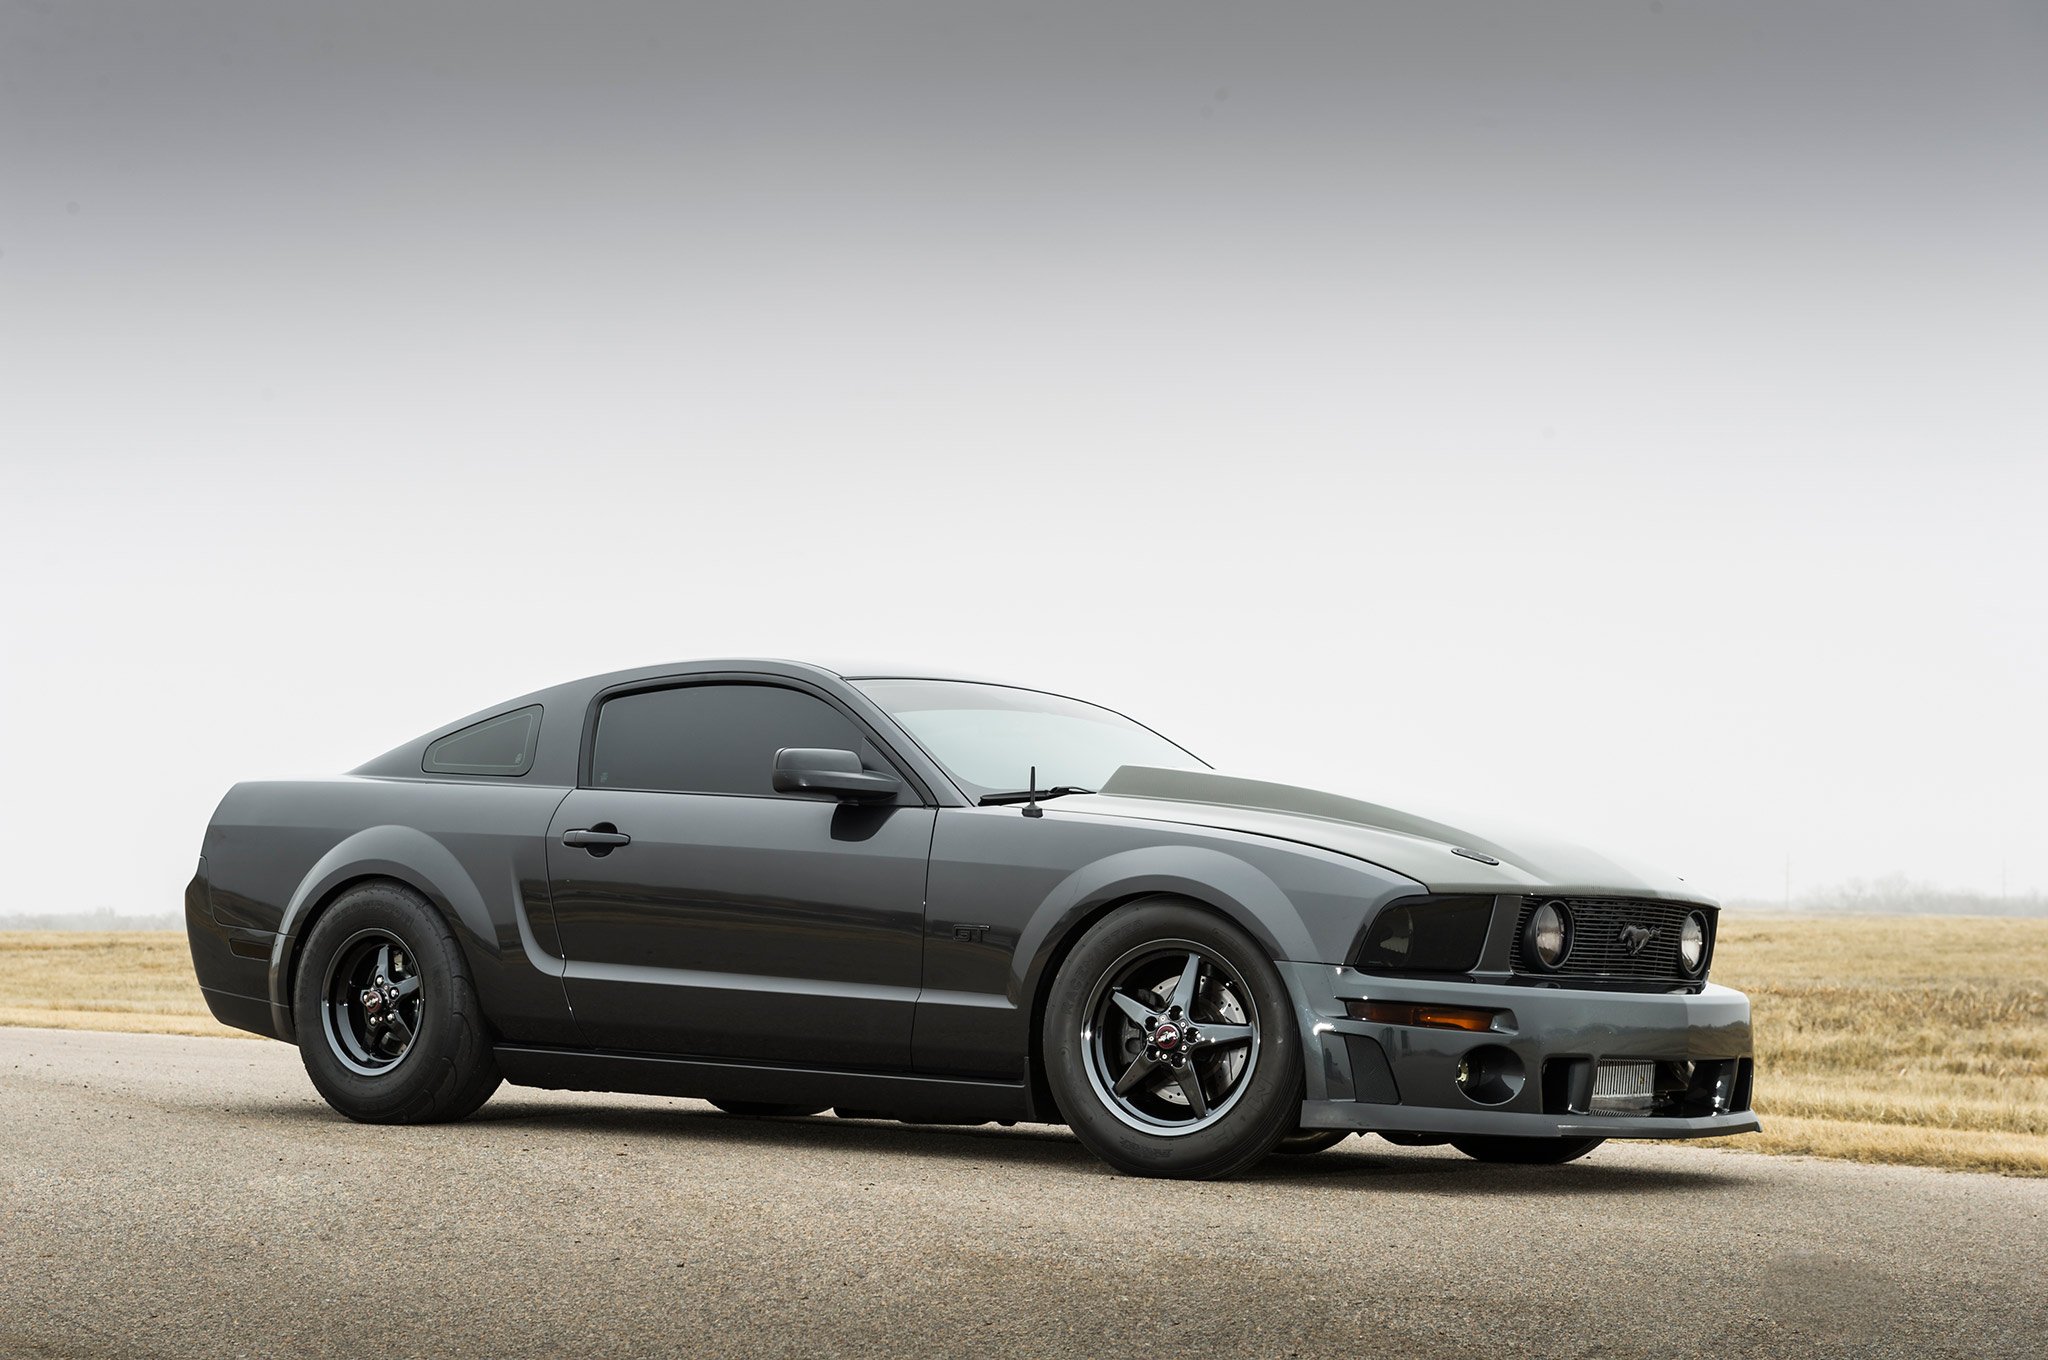 2007, Ford, Mustang, Gt, Pro, Street, Super, Drag, Muscle, Usa, 2048x1360 13 Wallpaper